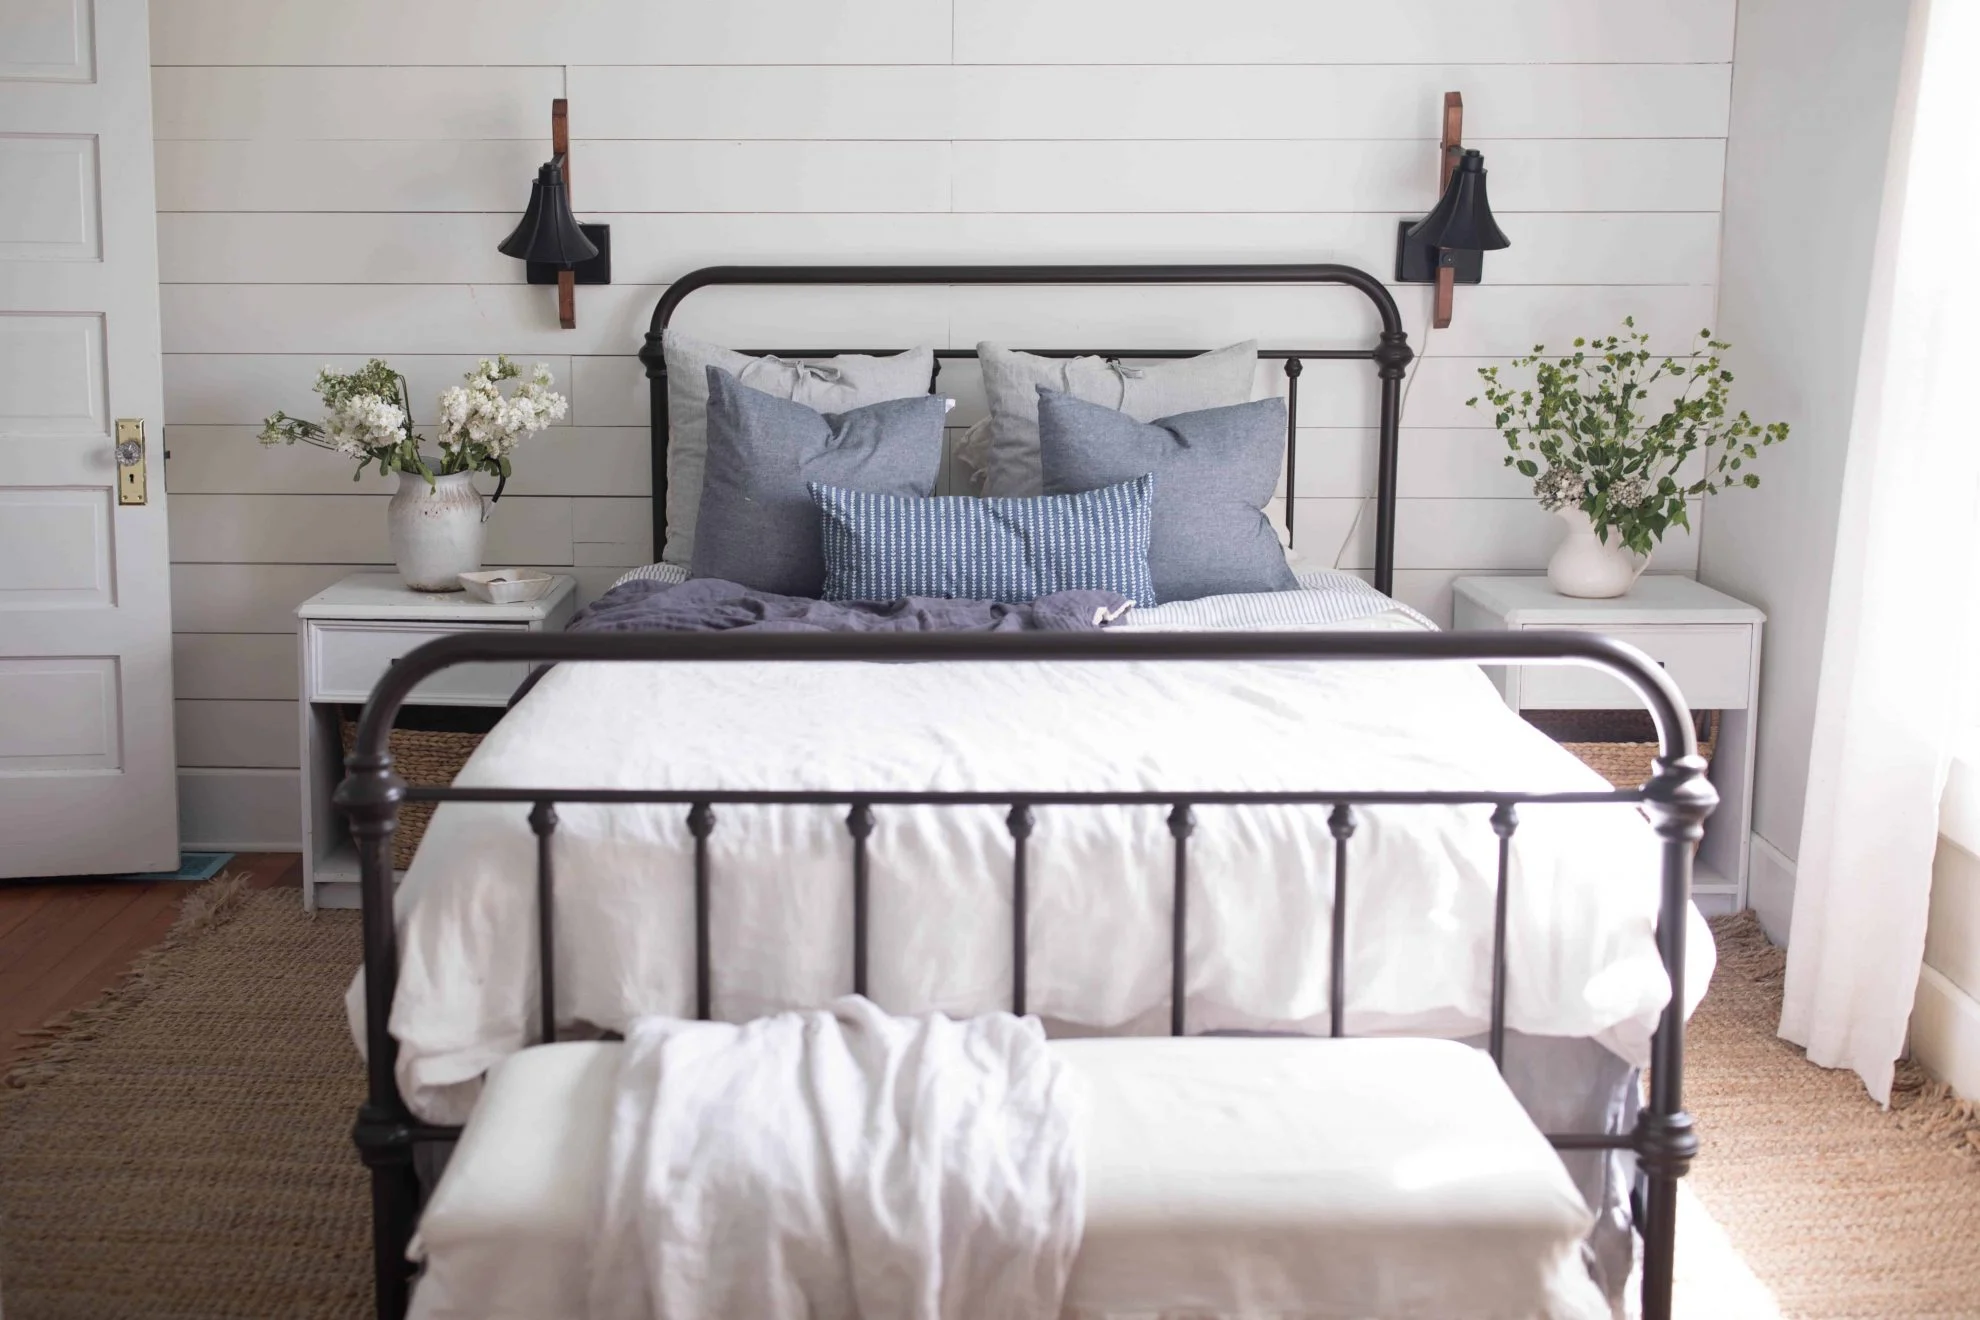 Farmhouse chic decor guest bedroom with shiplap wall painted in Benjamin Moore White Dove